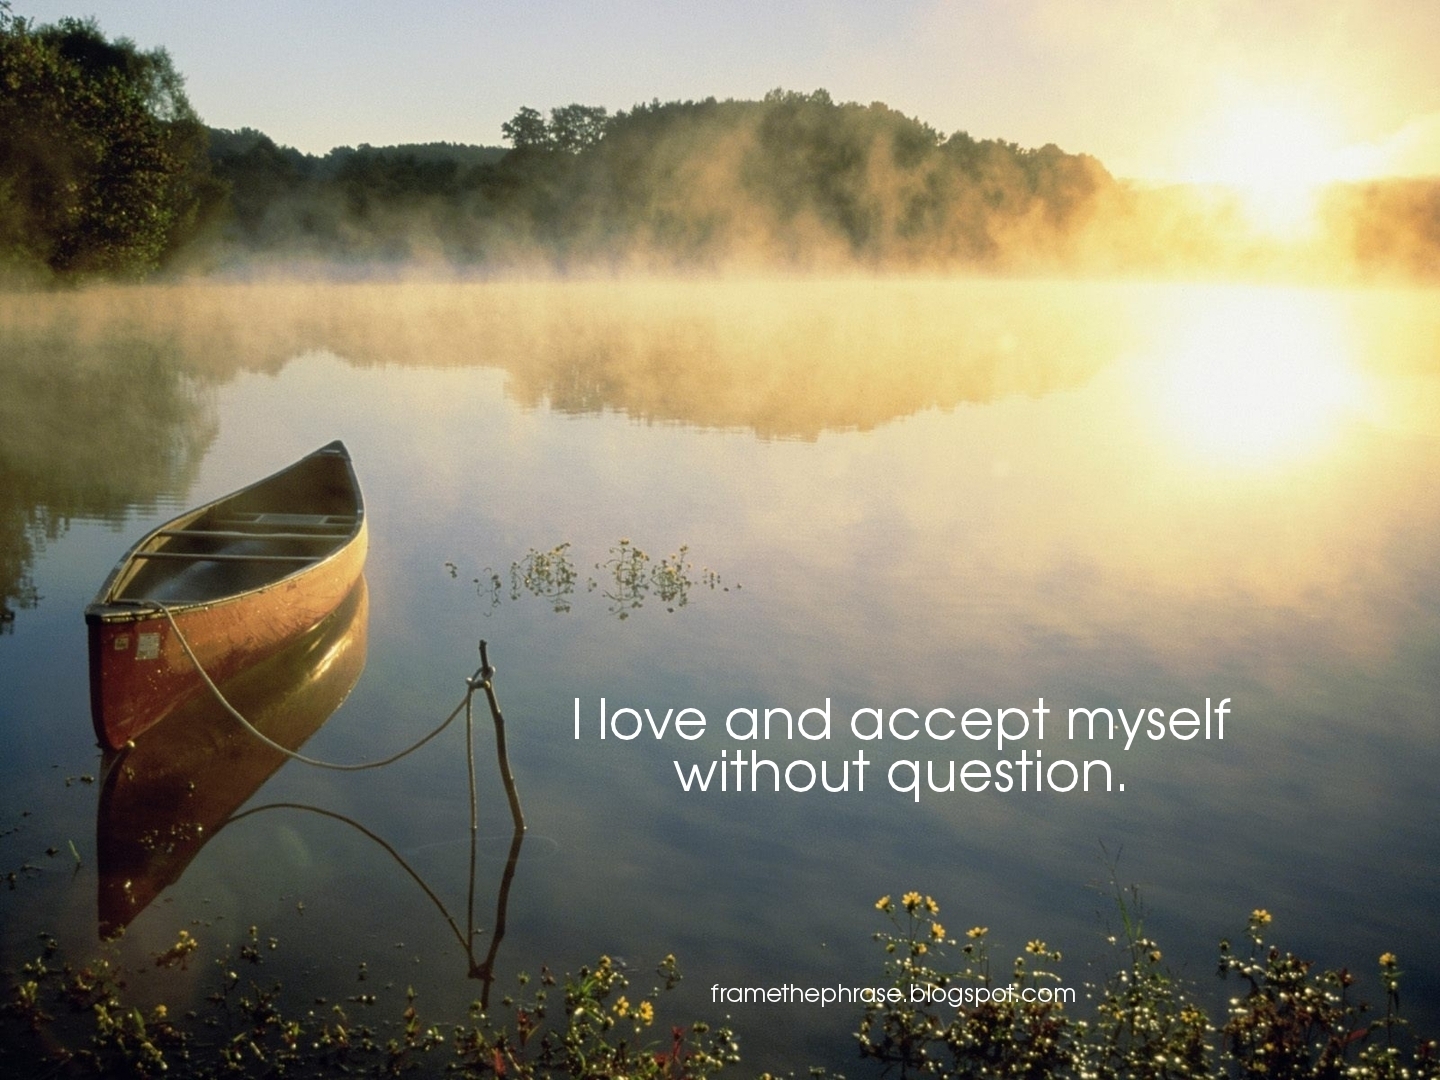 What Every Introvert Should Know About Self-Acceptance